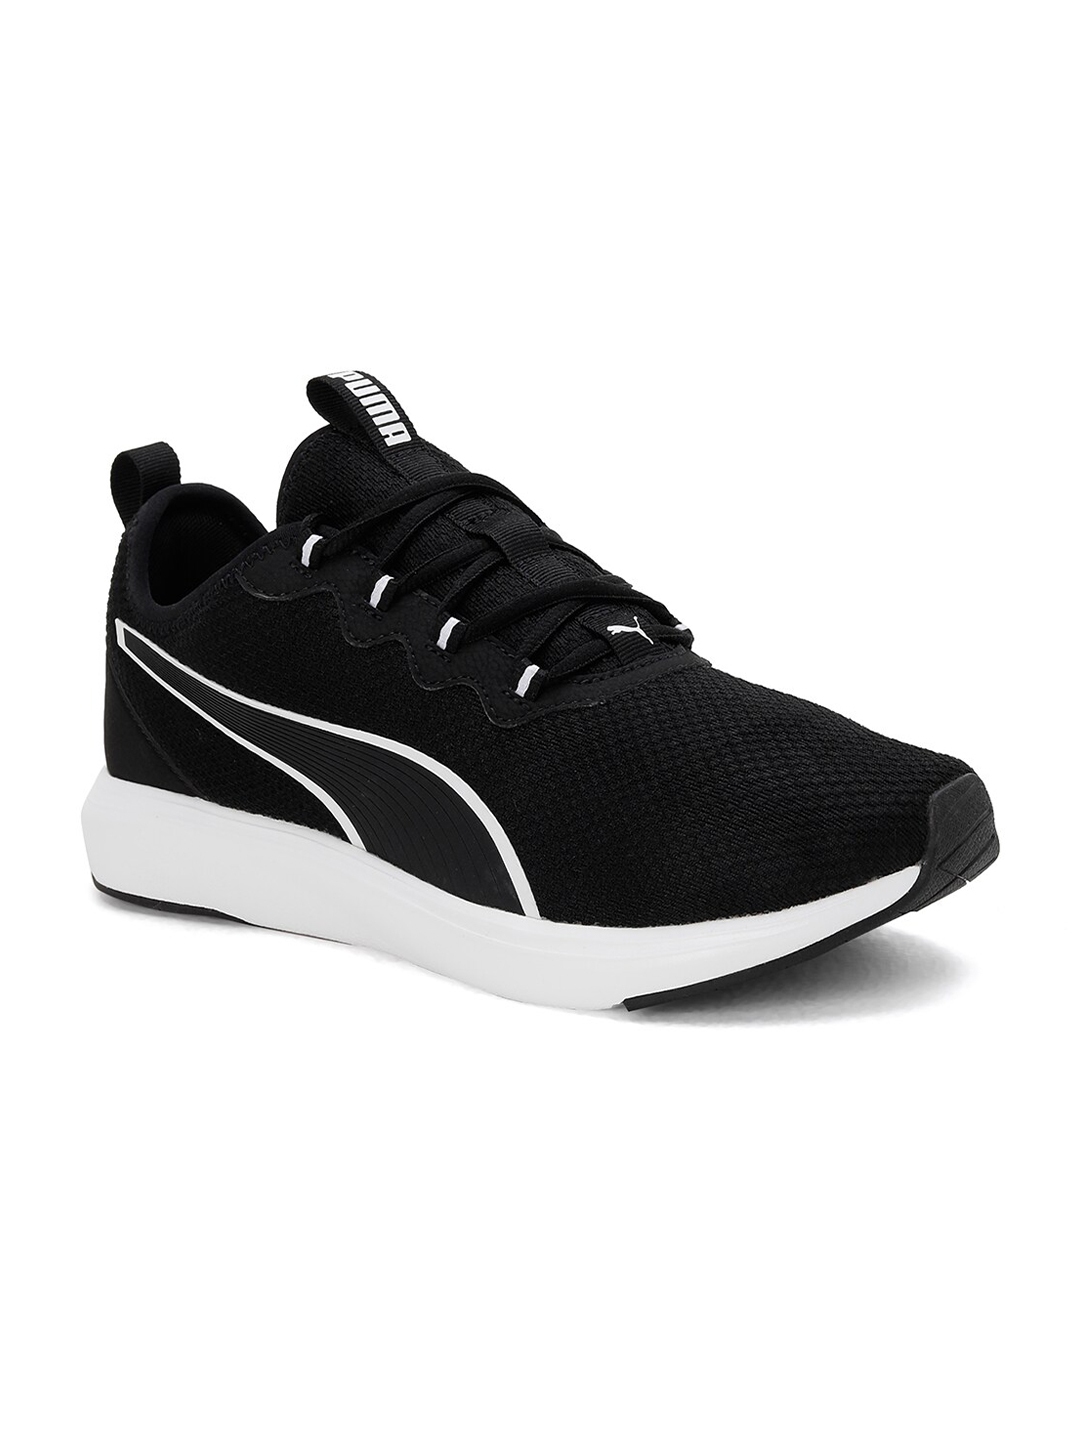 Buy Puma Softride Cruise Colourblocked Running Sports Shoes - Sports ...